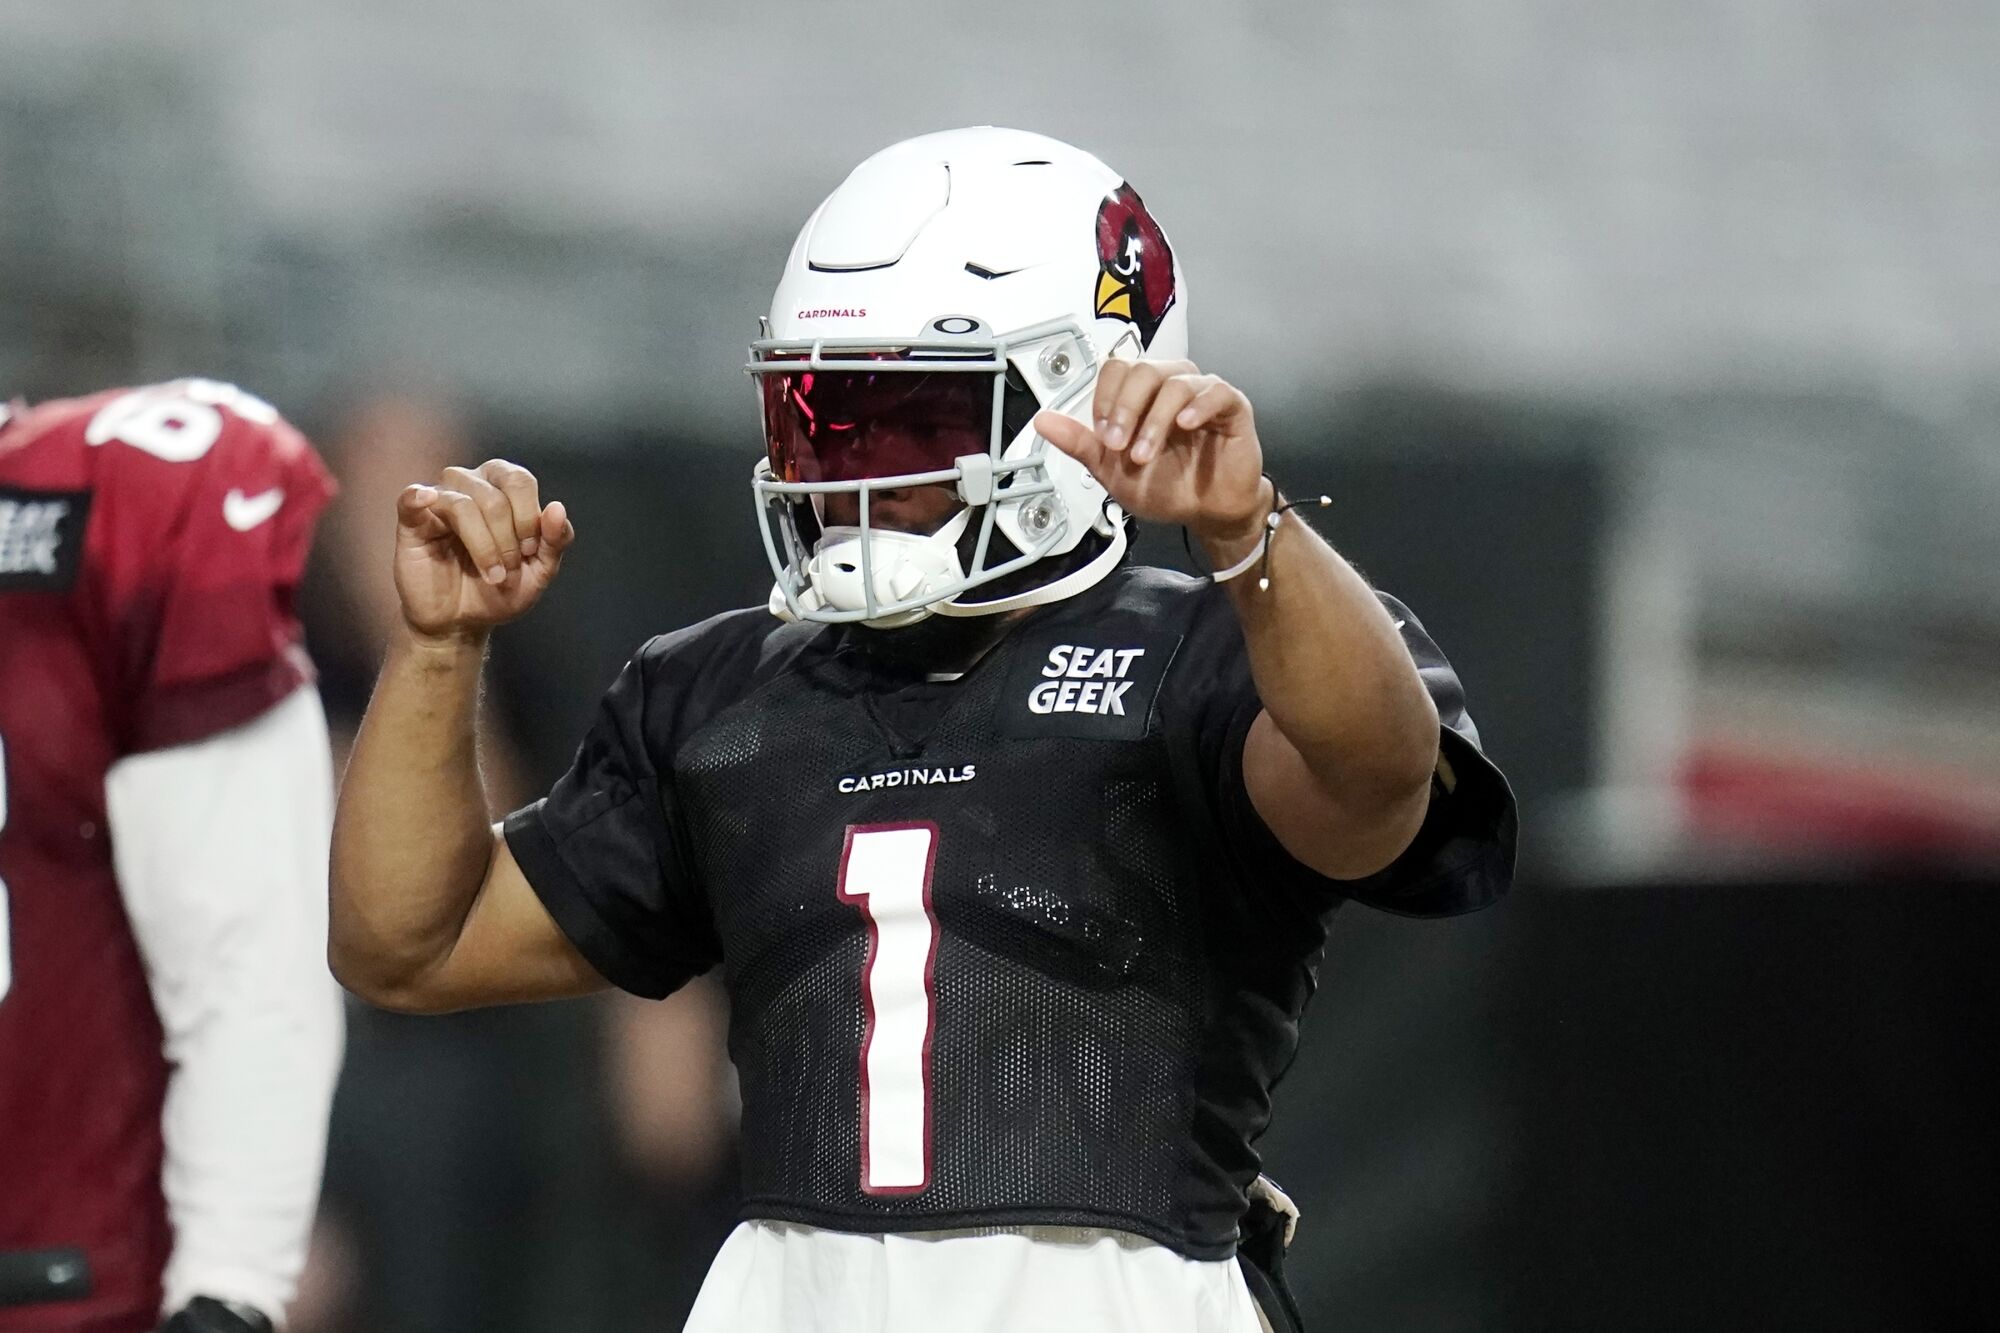 Arizona Cardinals quarterback Kyler Murray gives signals to receivers as he takes part in drills.